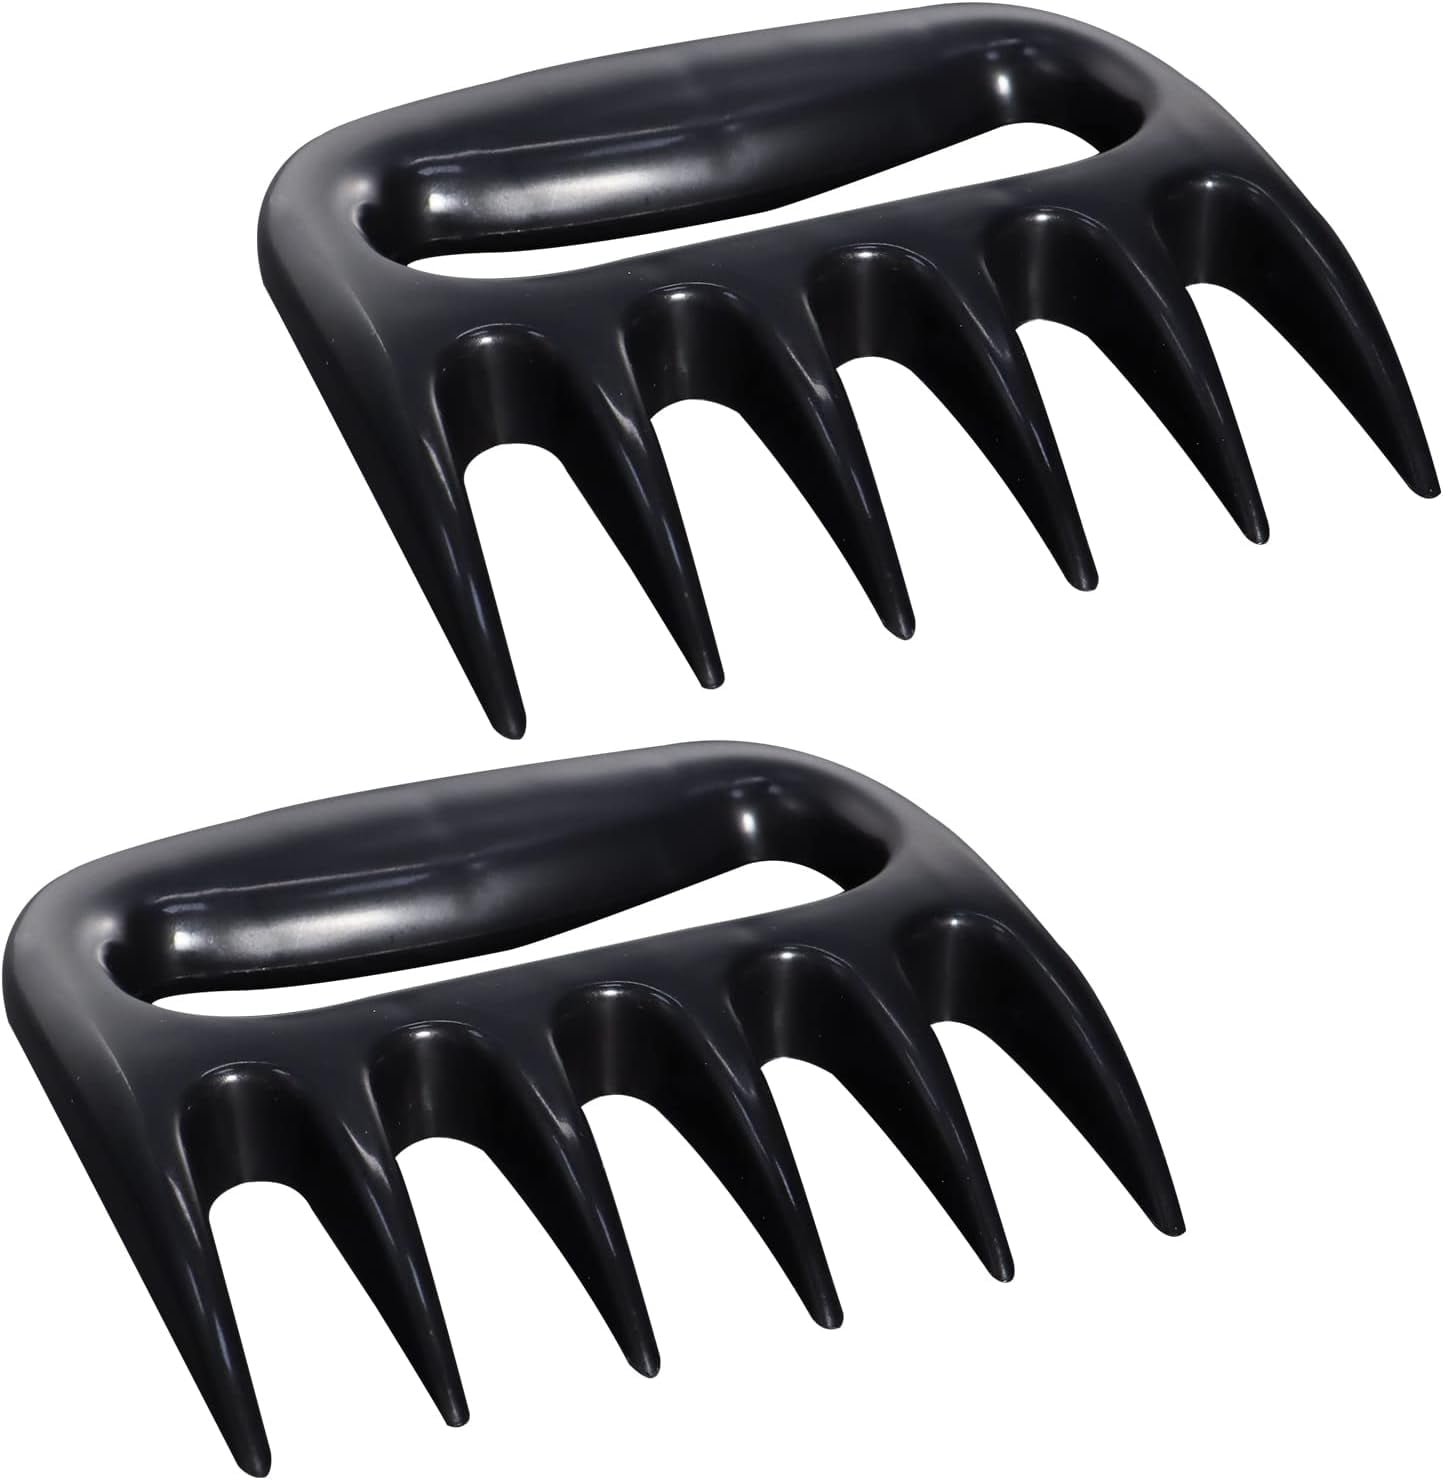  Grill Trade Metal Meat Claws - 1x4x4-Inch Bear Shredder Puller  Tool for Shredding Pulled Pork, Chicken, Turkey, Beef - Non-Slip Grip  Barbecue, Grilling Accessories for Kitchen or BBQ Party - Black 